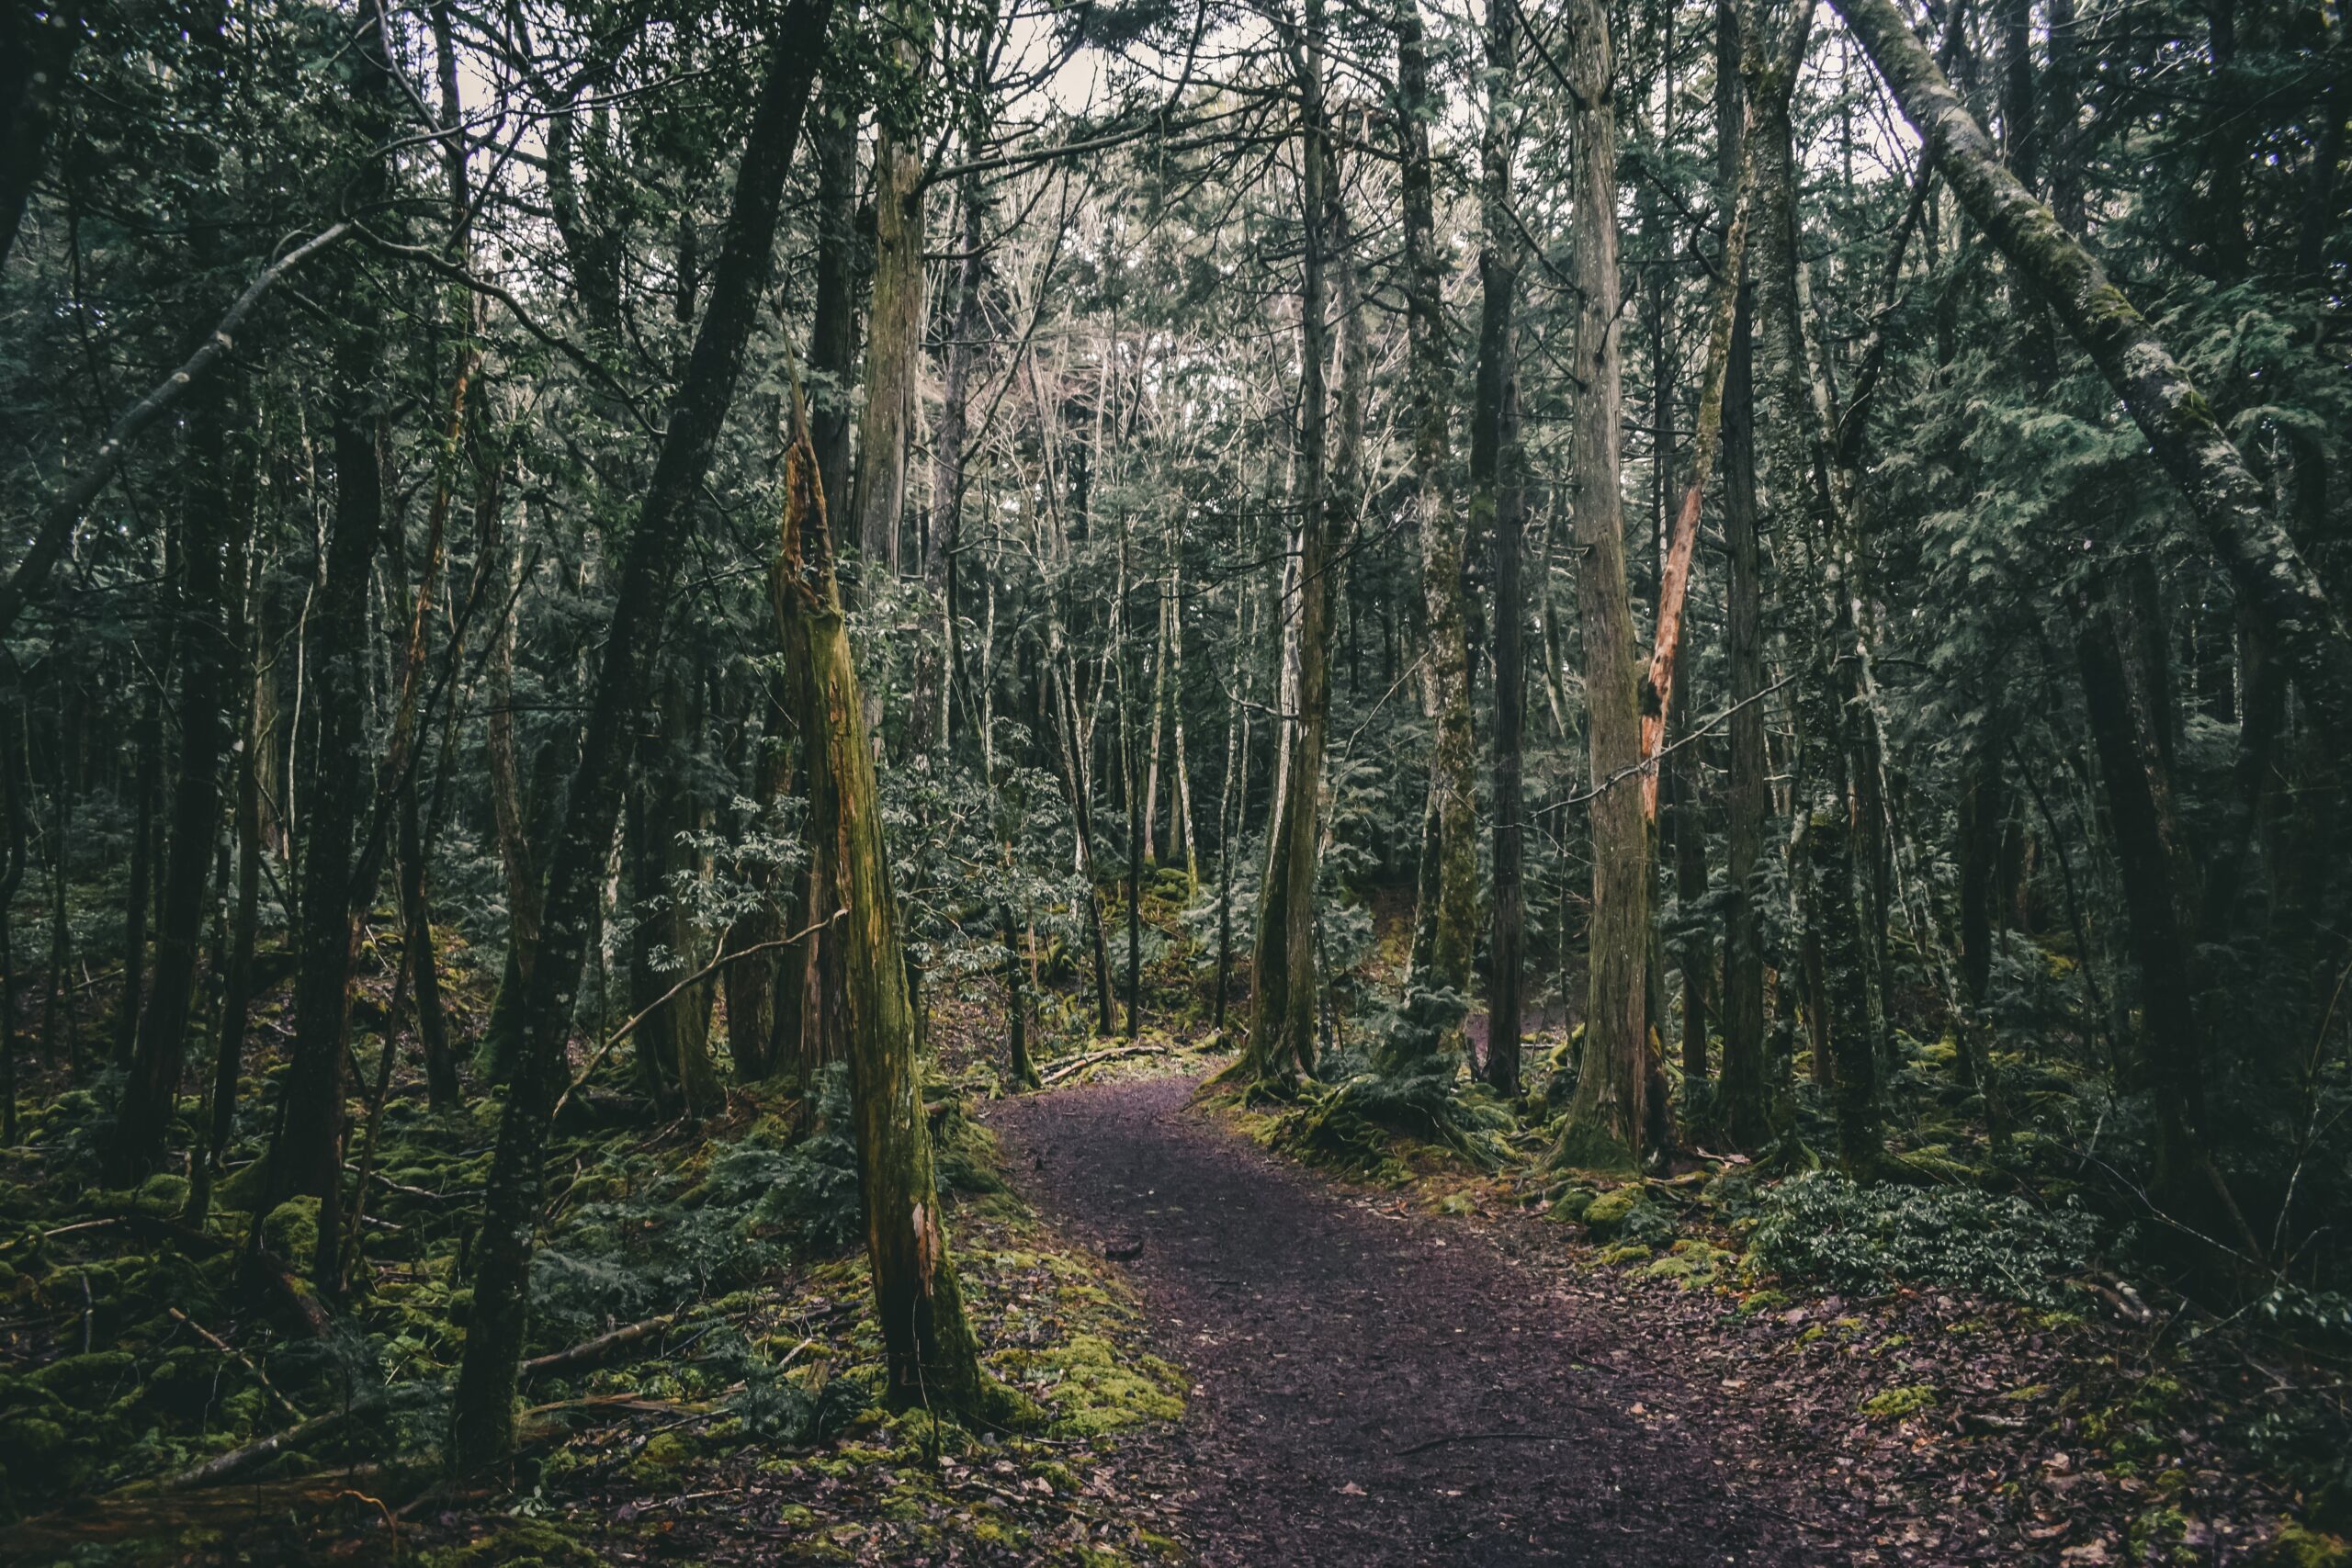 Tourism in Aokigahara Forest is a touchy subject, due to the dark history of the destination.
pictured: A trail on the Aokigahara Forest with a dark looming atmosphere